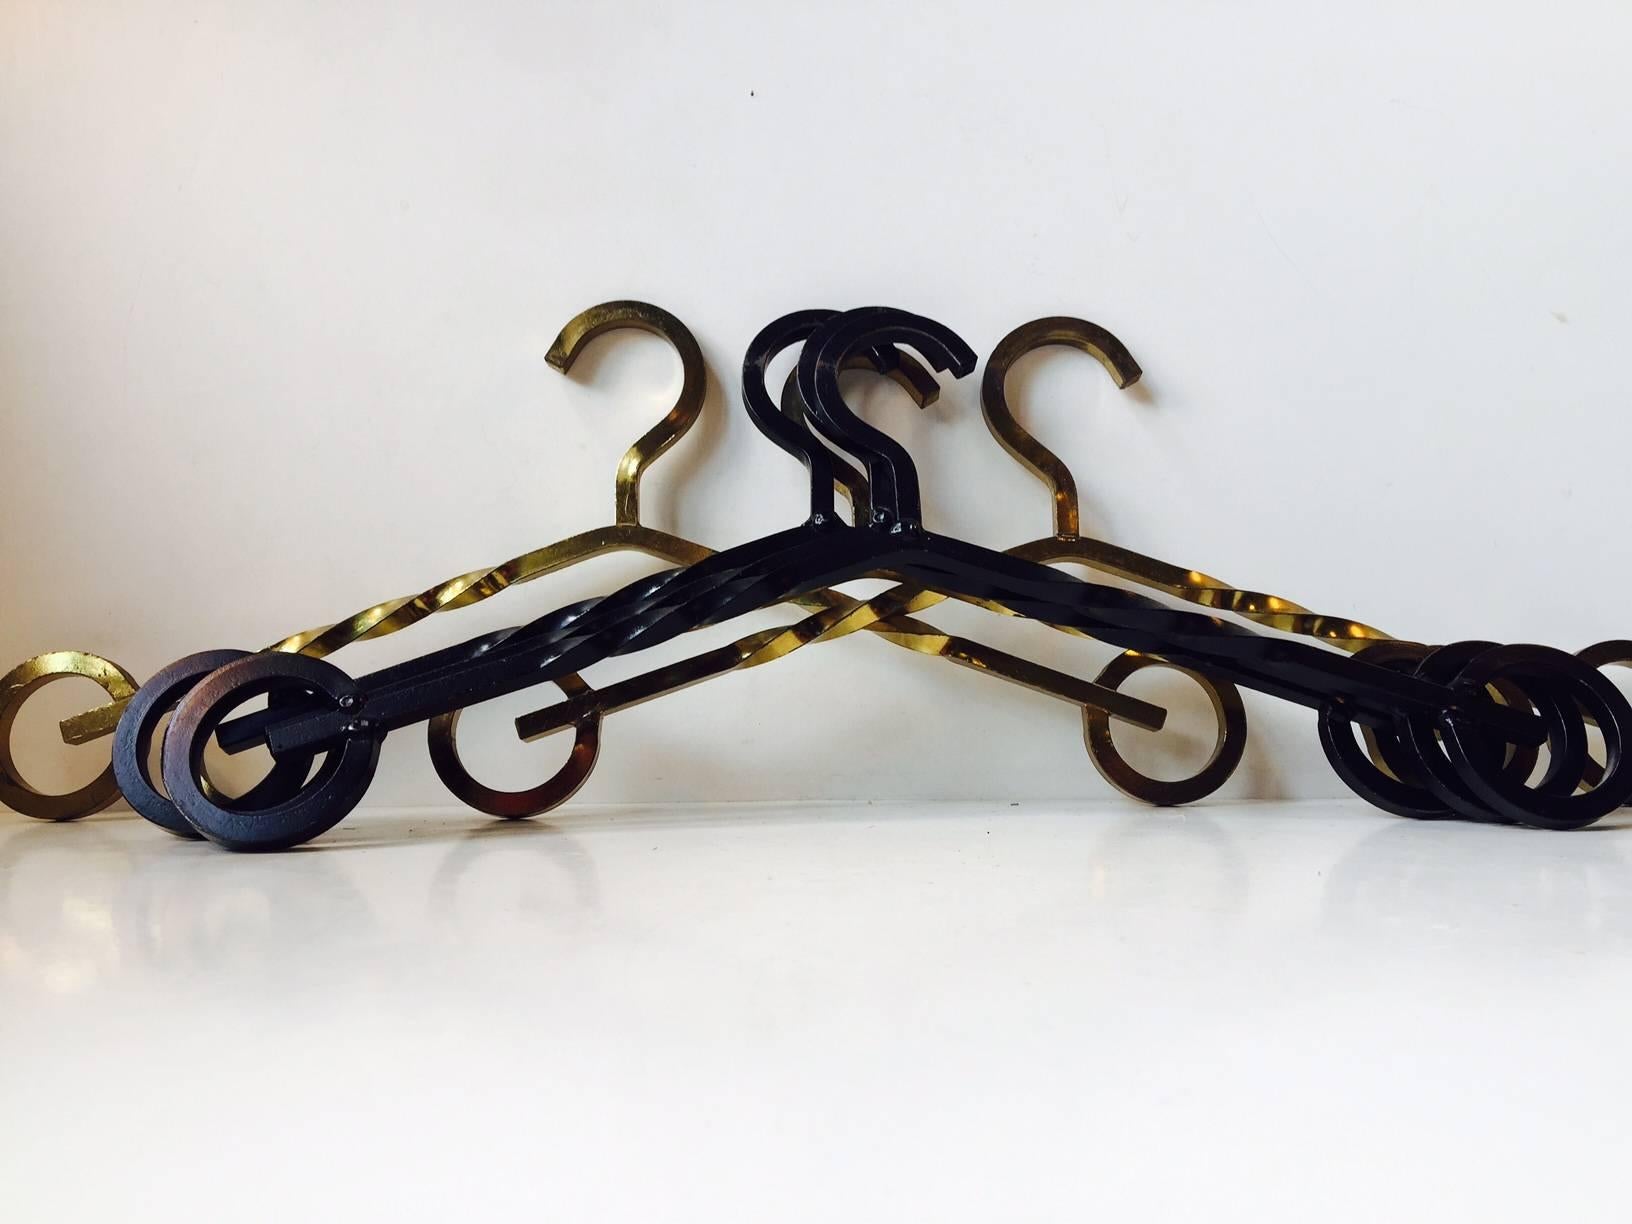 Hand-welded in Denmark during the 1970s this set of twisted iron and brass coat hangers stylistically displays midcentury Brutalism. The price is for the set of six.